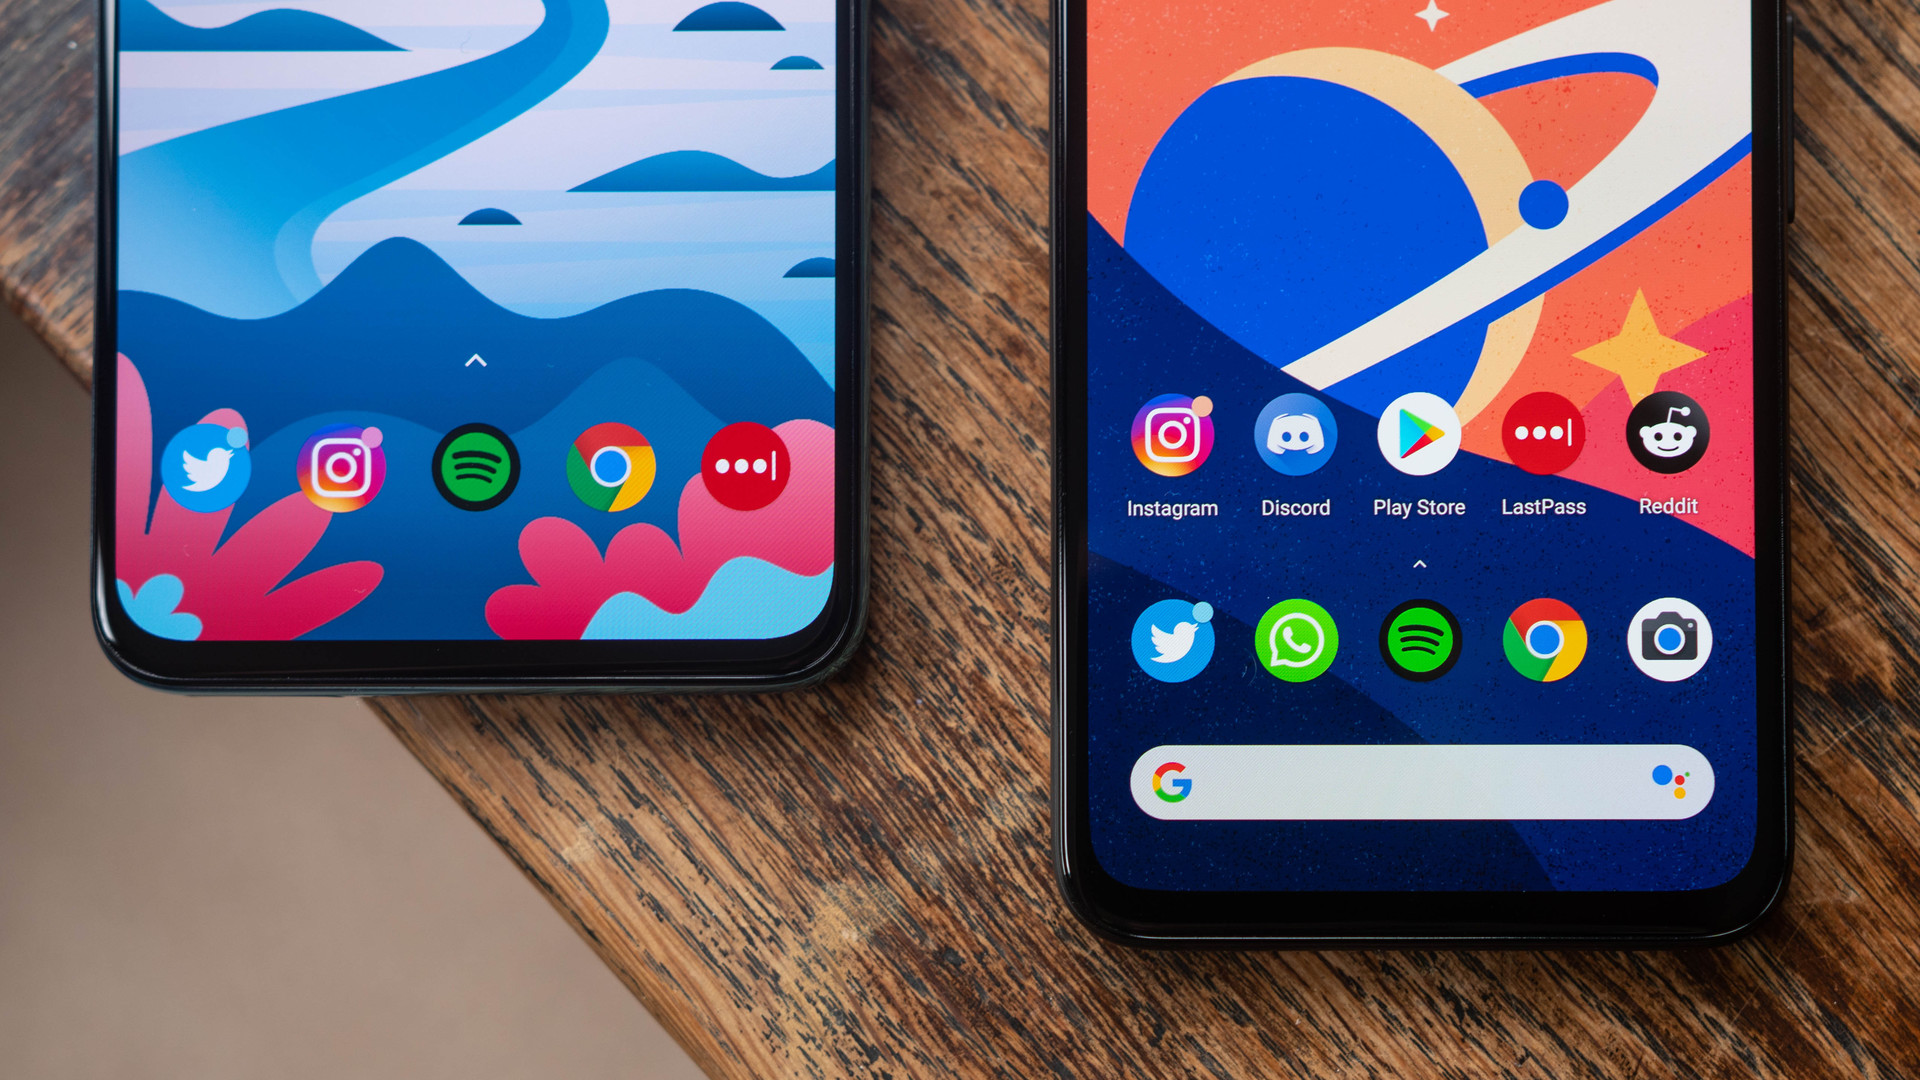 OnePlus Nord vs Pixel 4a The bottom of both devices side by side in a staggered view